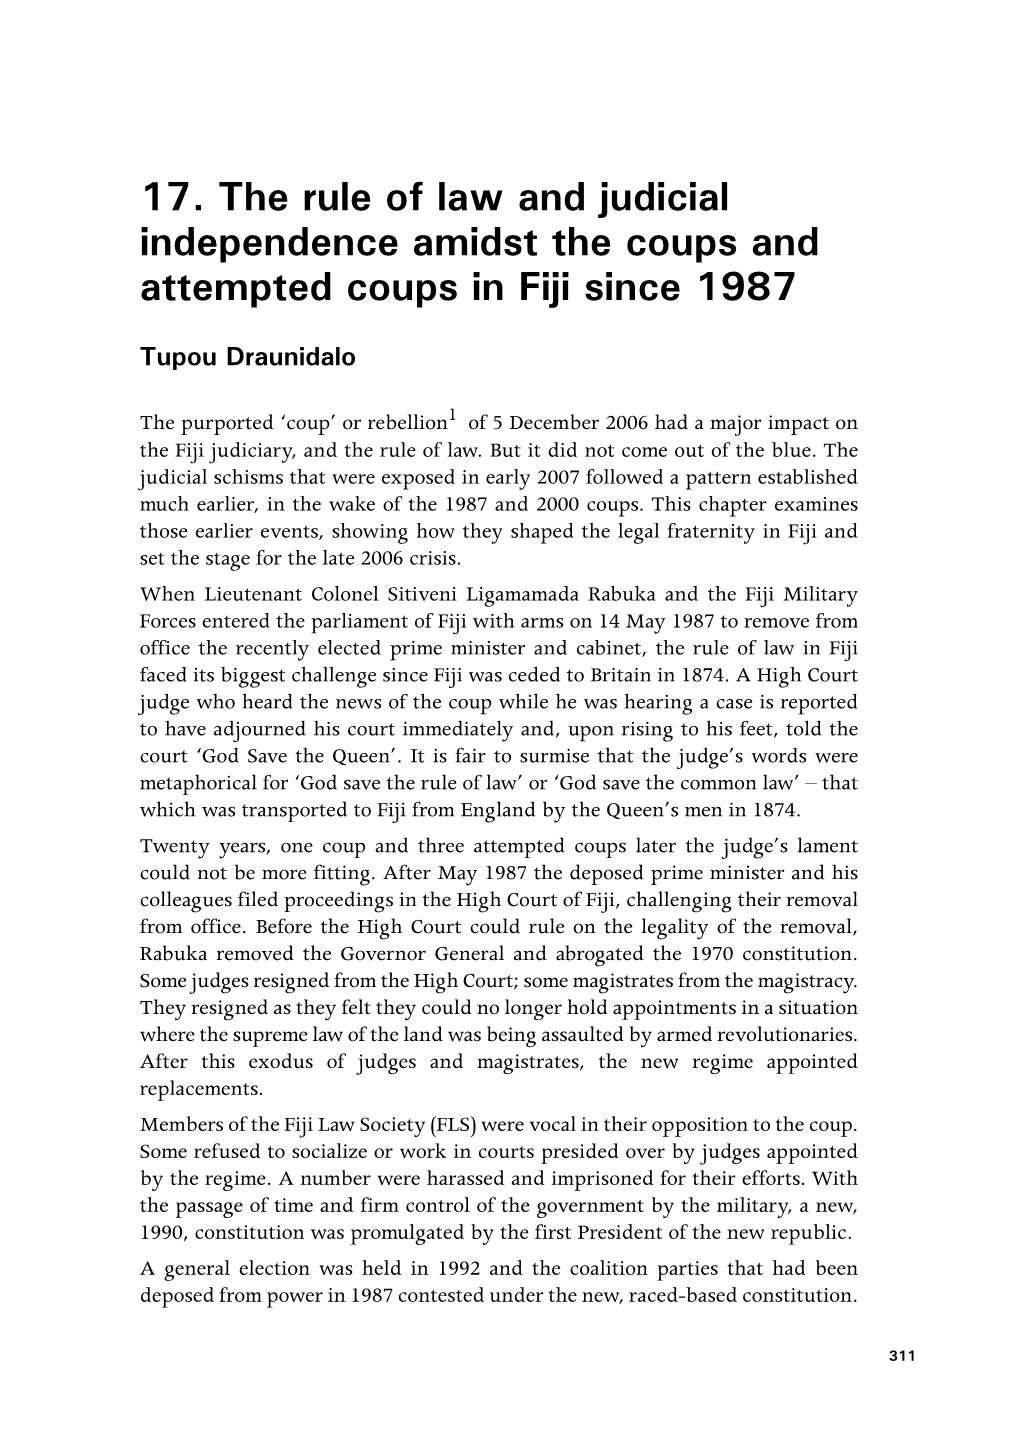 The Rule of Law and Judicial Independence Amidst the Coups and Attempted Coups in Fiji Since 1987